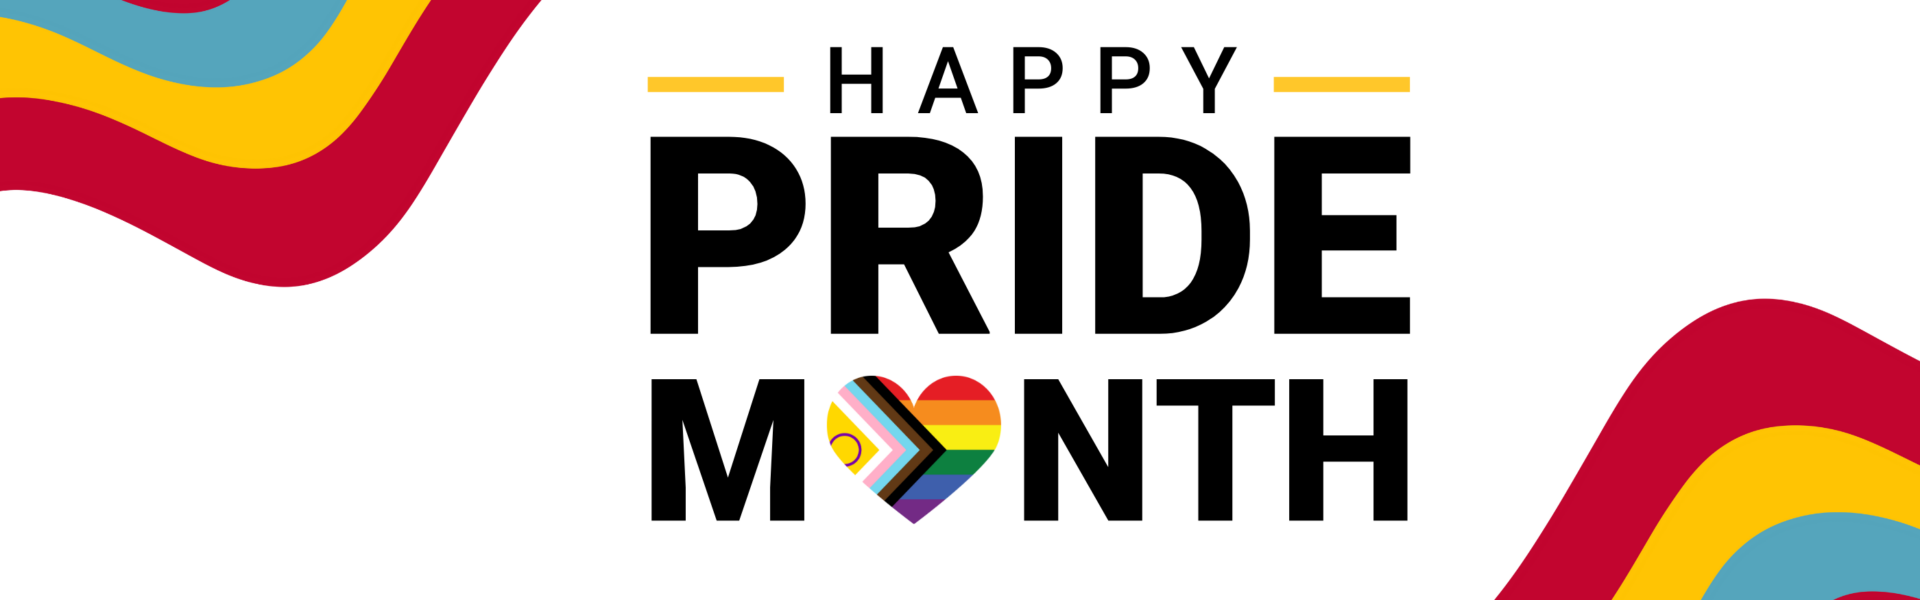 Happy Pride Month. The O in month is the inclusive pride flag in the shape of a heart.